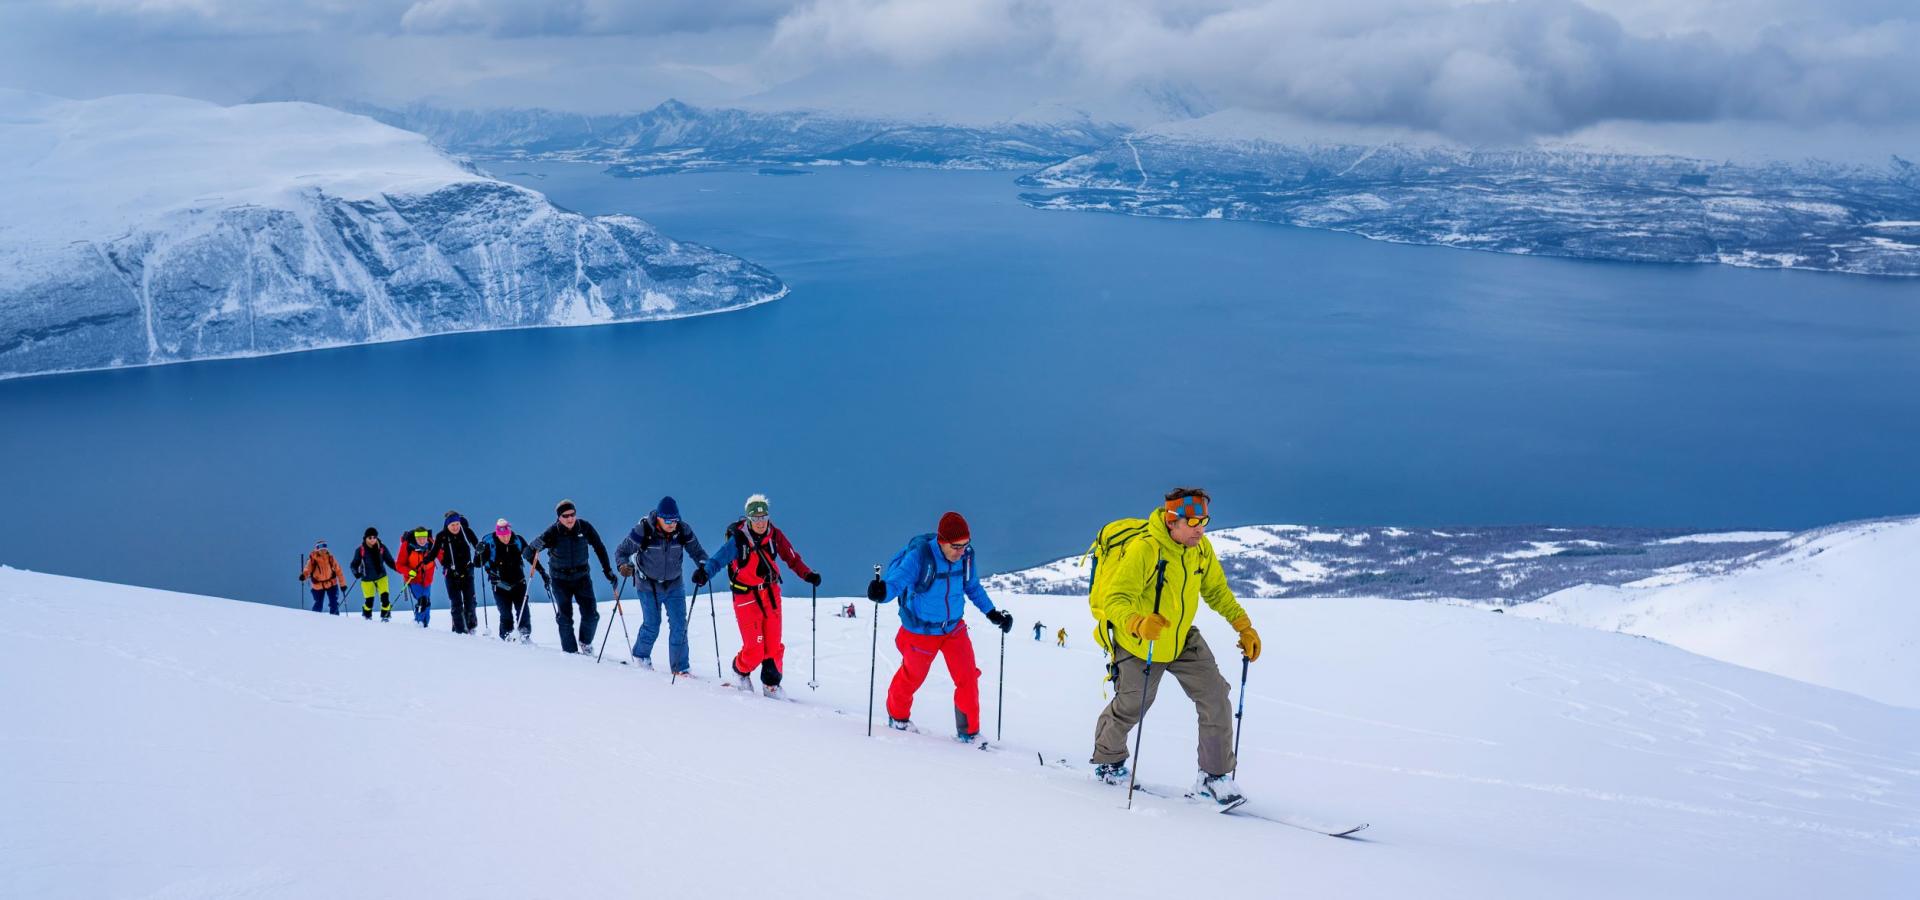 10 persons skiing. Walking up the mountain. Sea behind them.